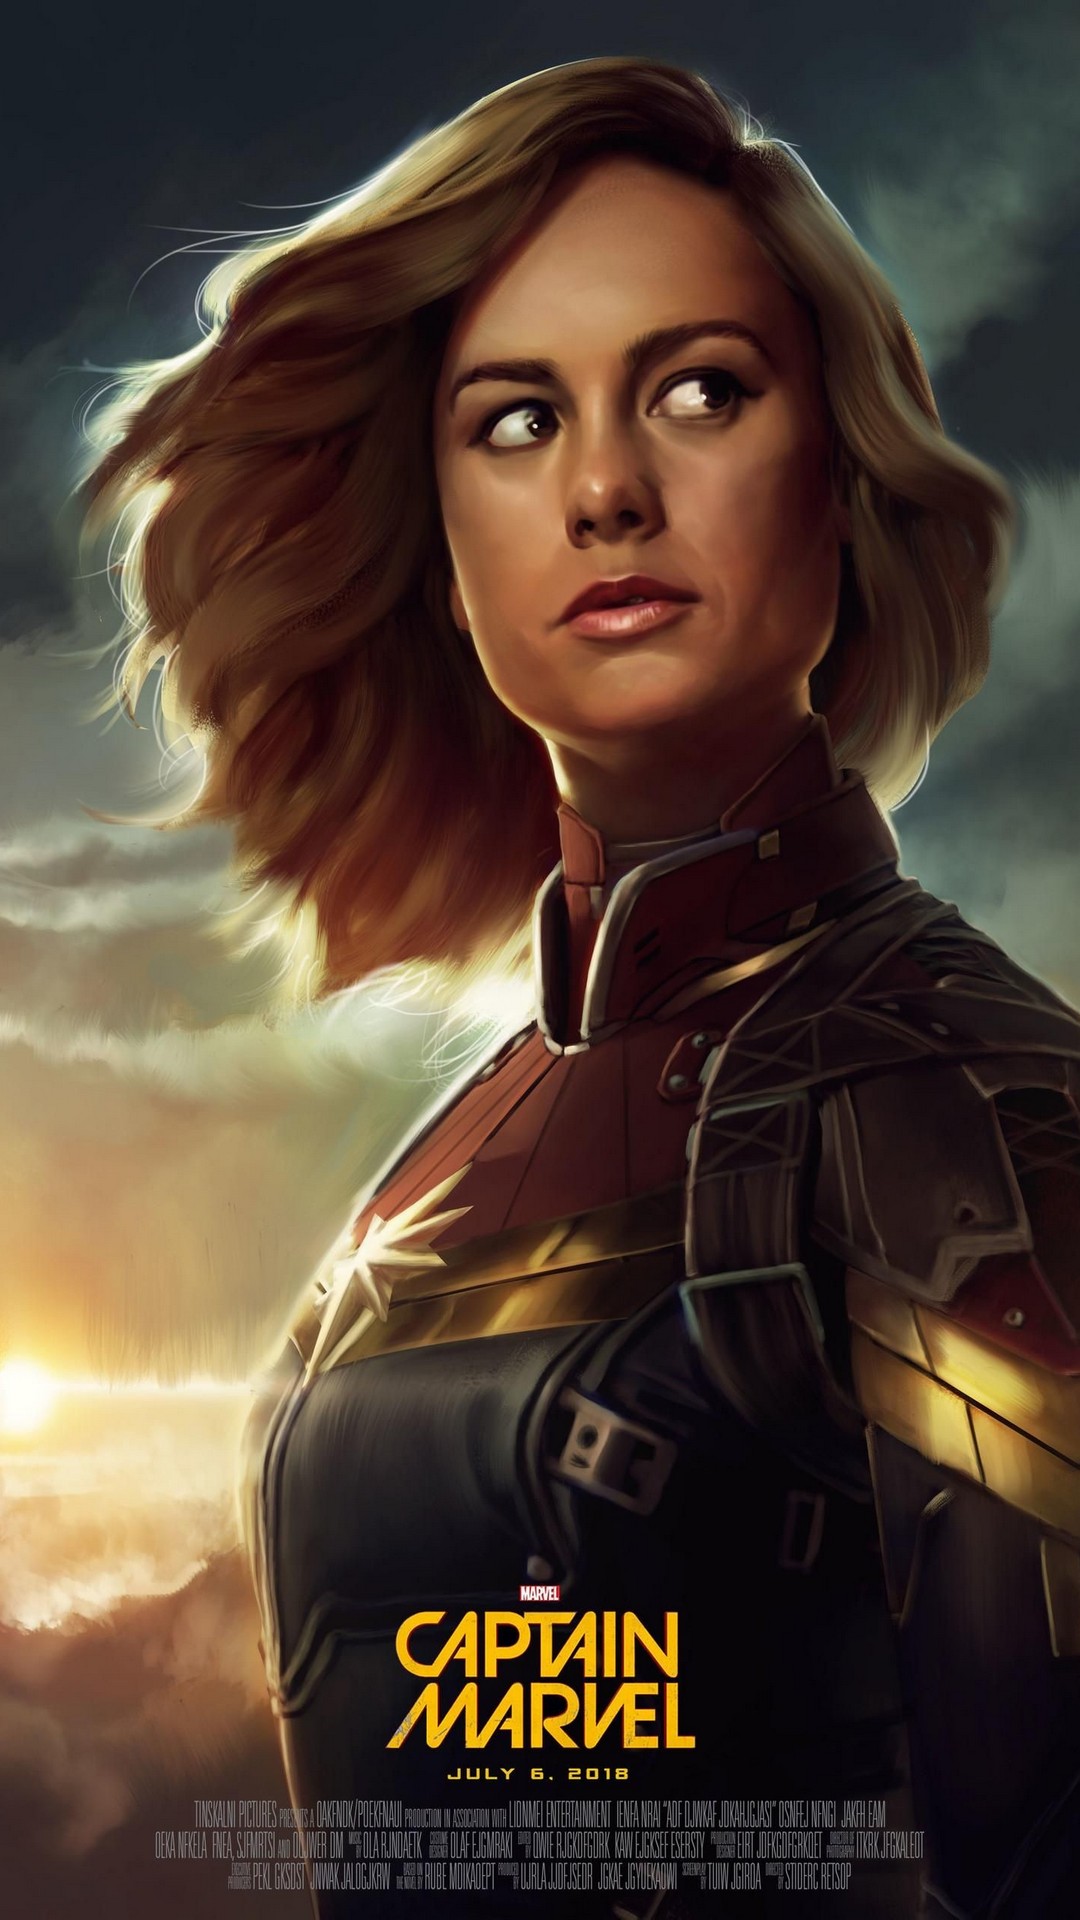 Captain Marvel Android Wallpaper With High-resolution - HD Wallpaper 